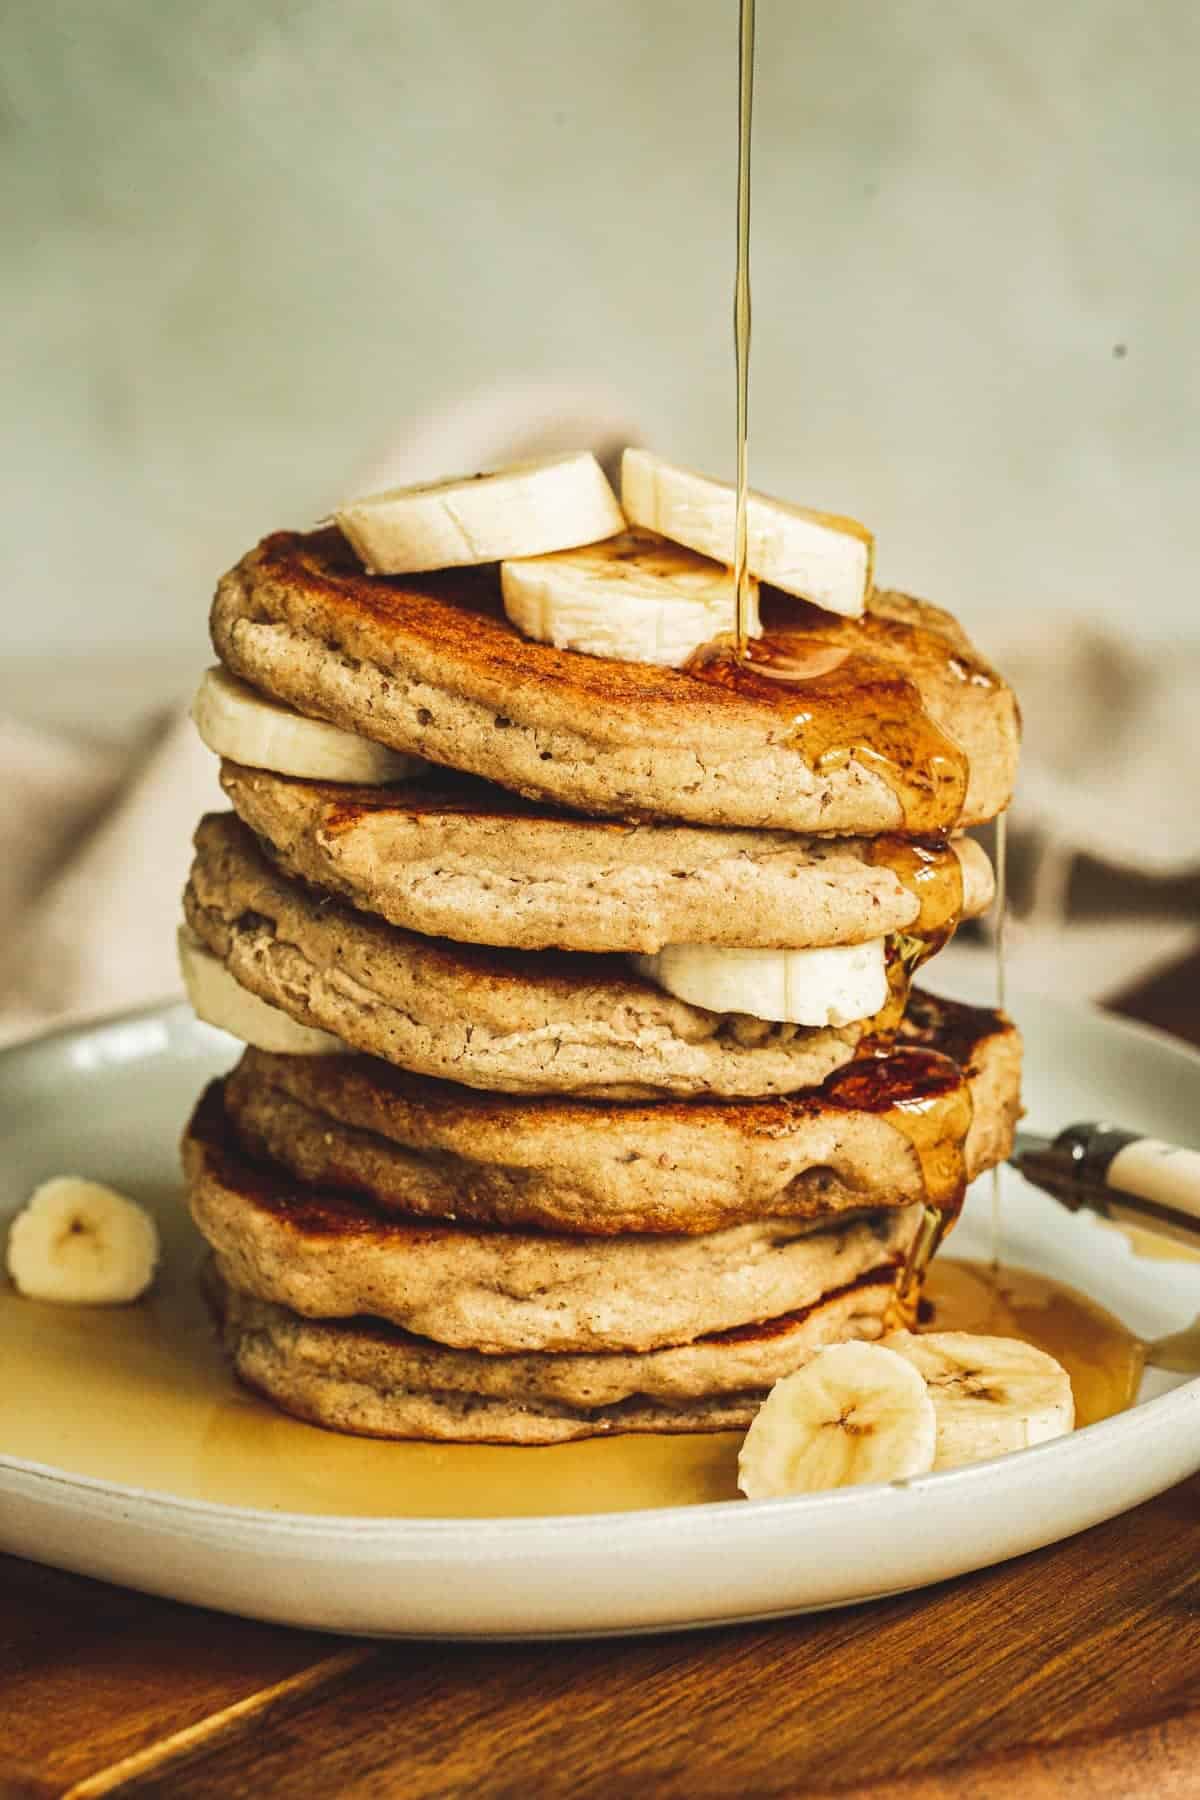 Vegan banana pancakes stacked with syrup dripping down the side.